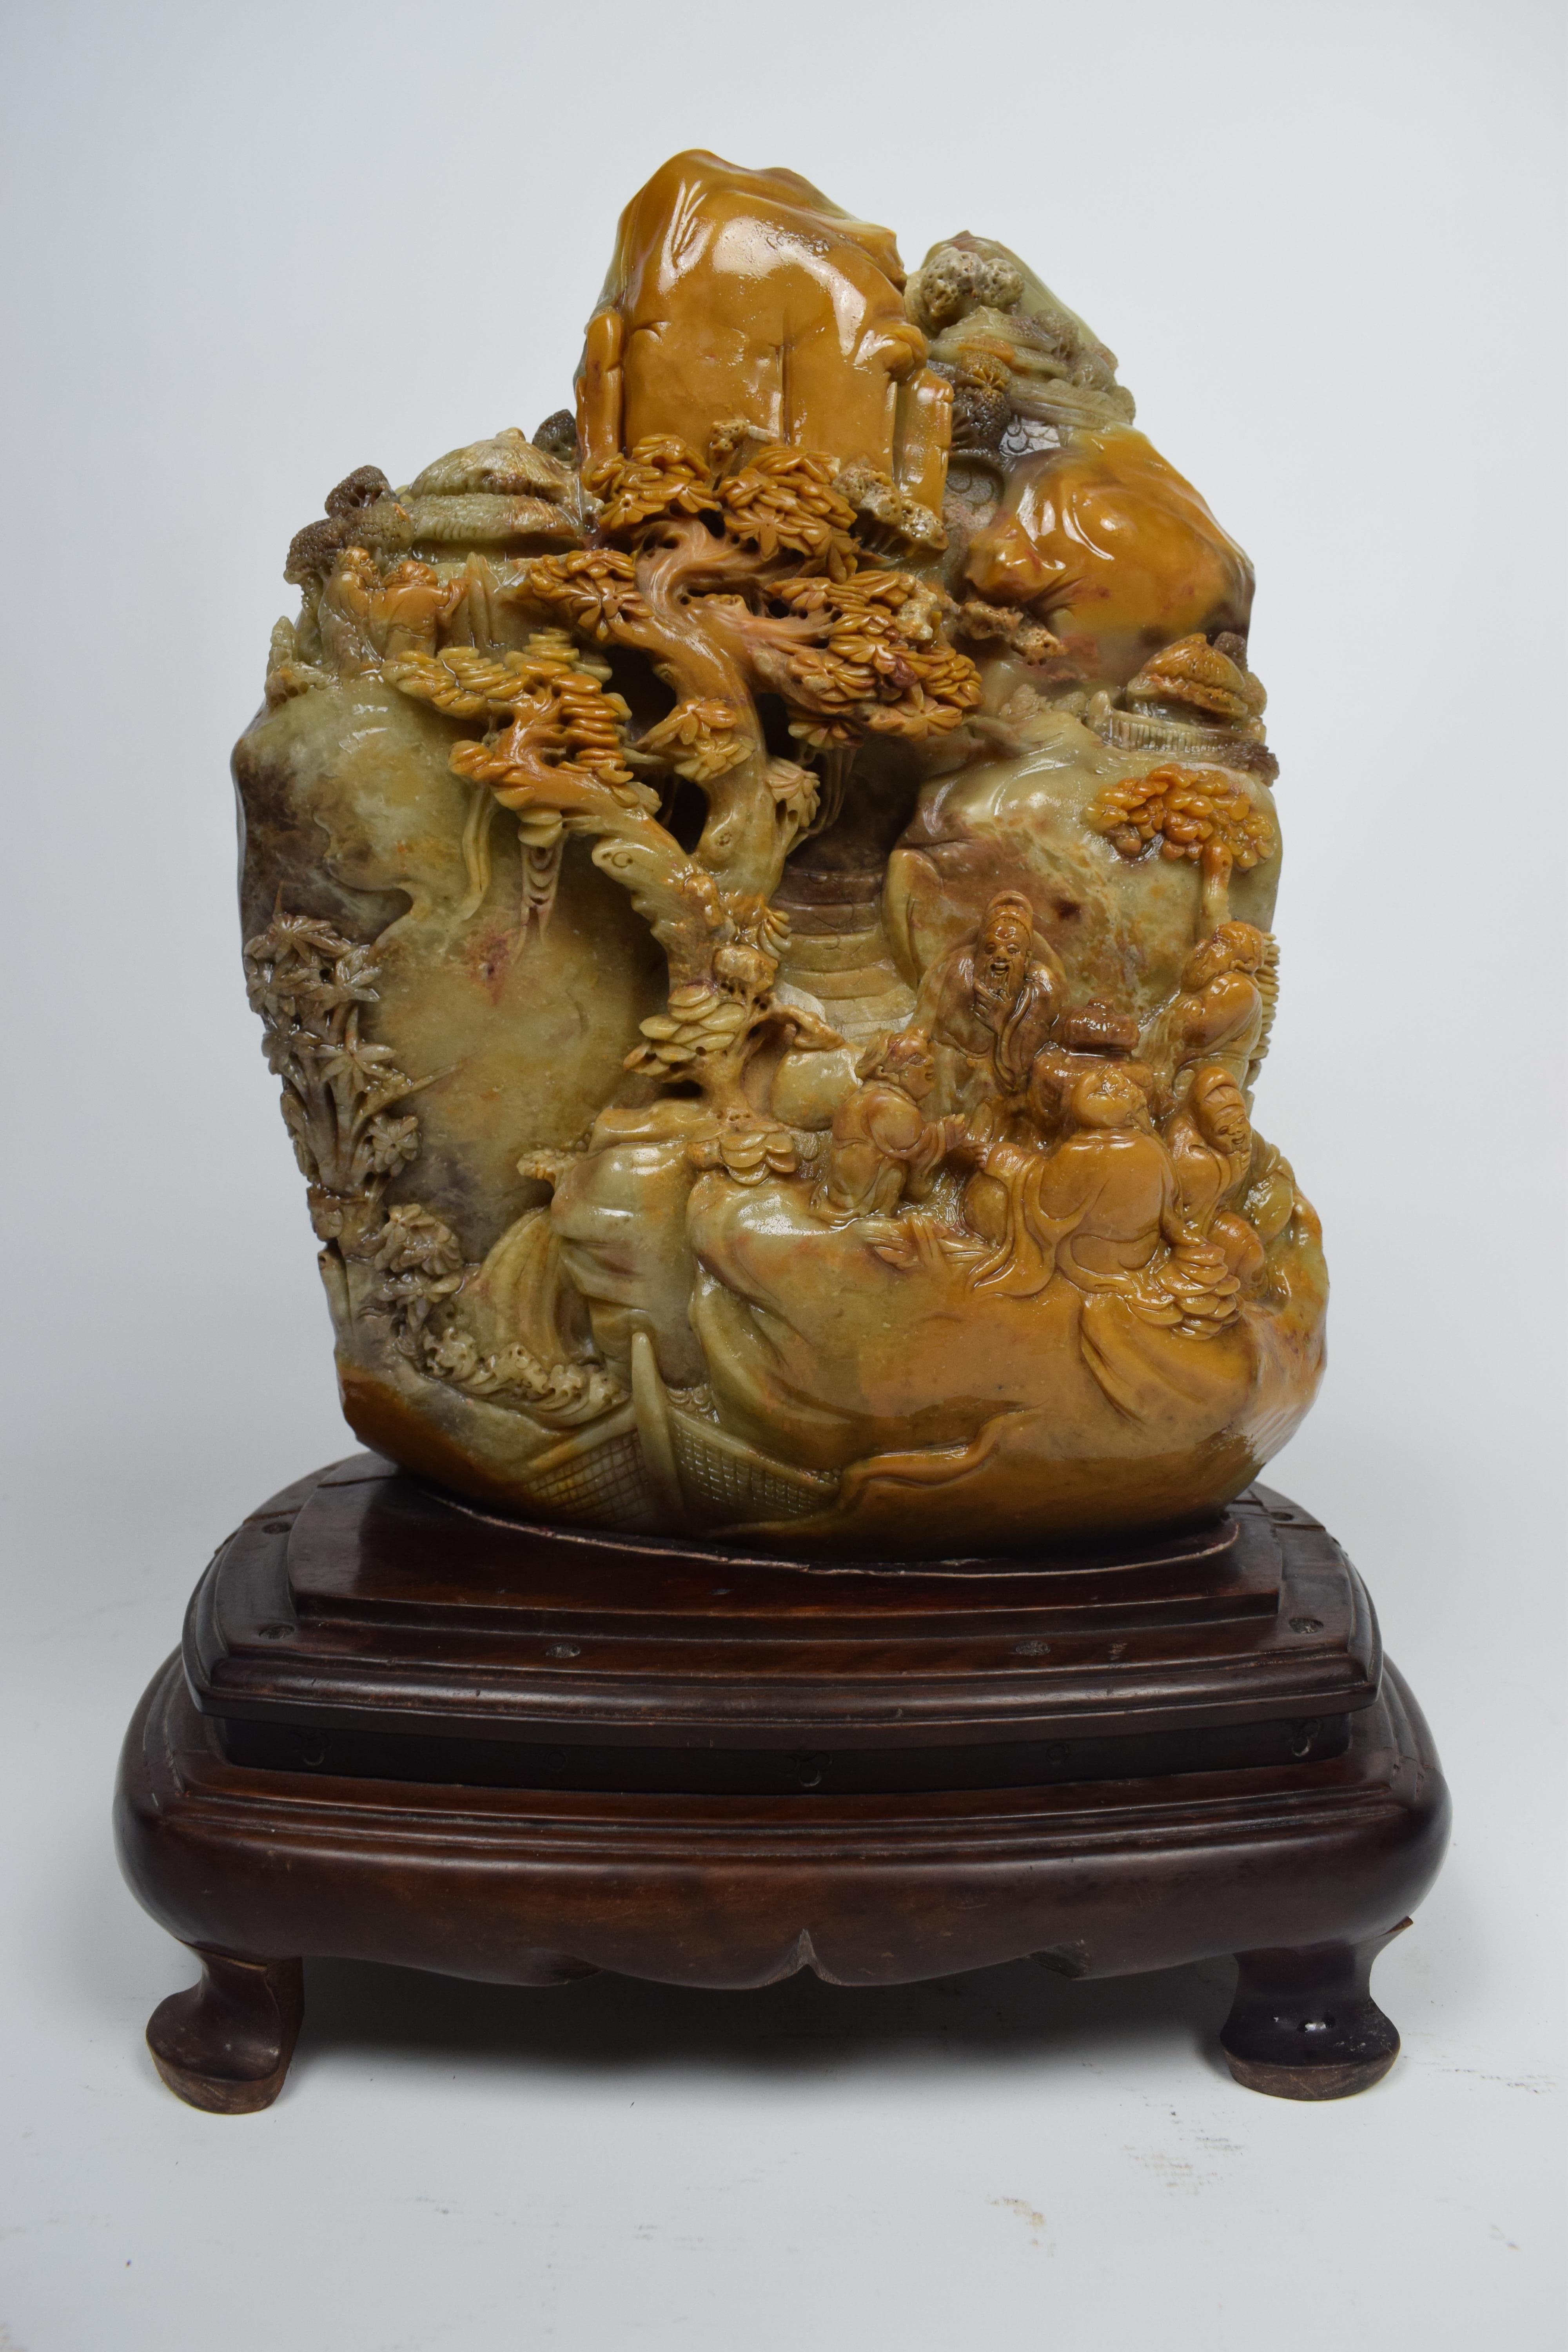 The Chinese yellow soapstone carving from the mid-20th century is depicting a village scene, is a stunning piece of art with intricate details and cultural significance. Yellow soapstone is a popular material for carving in China due to its smooth